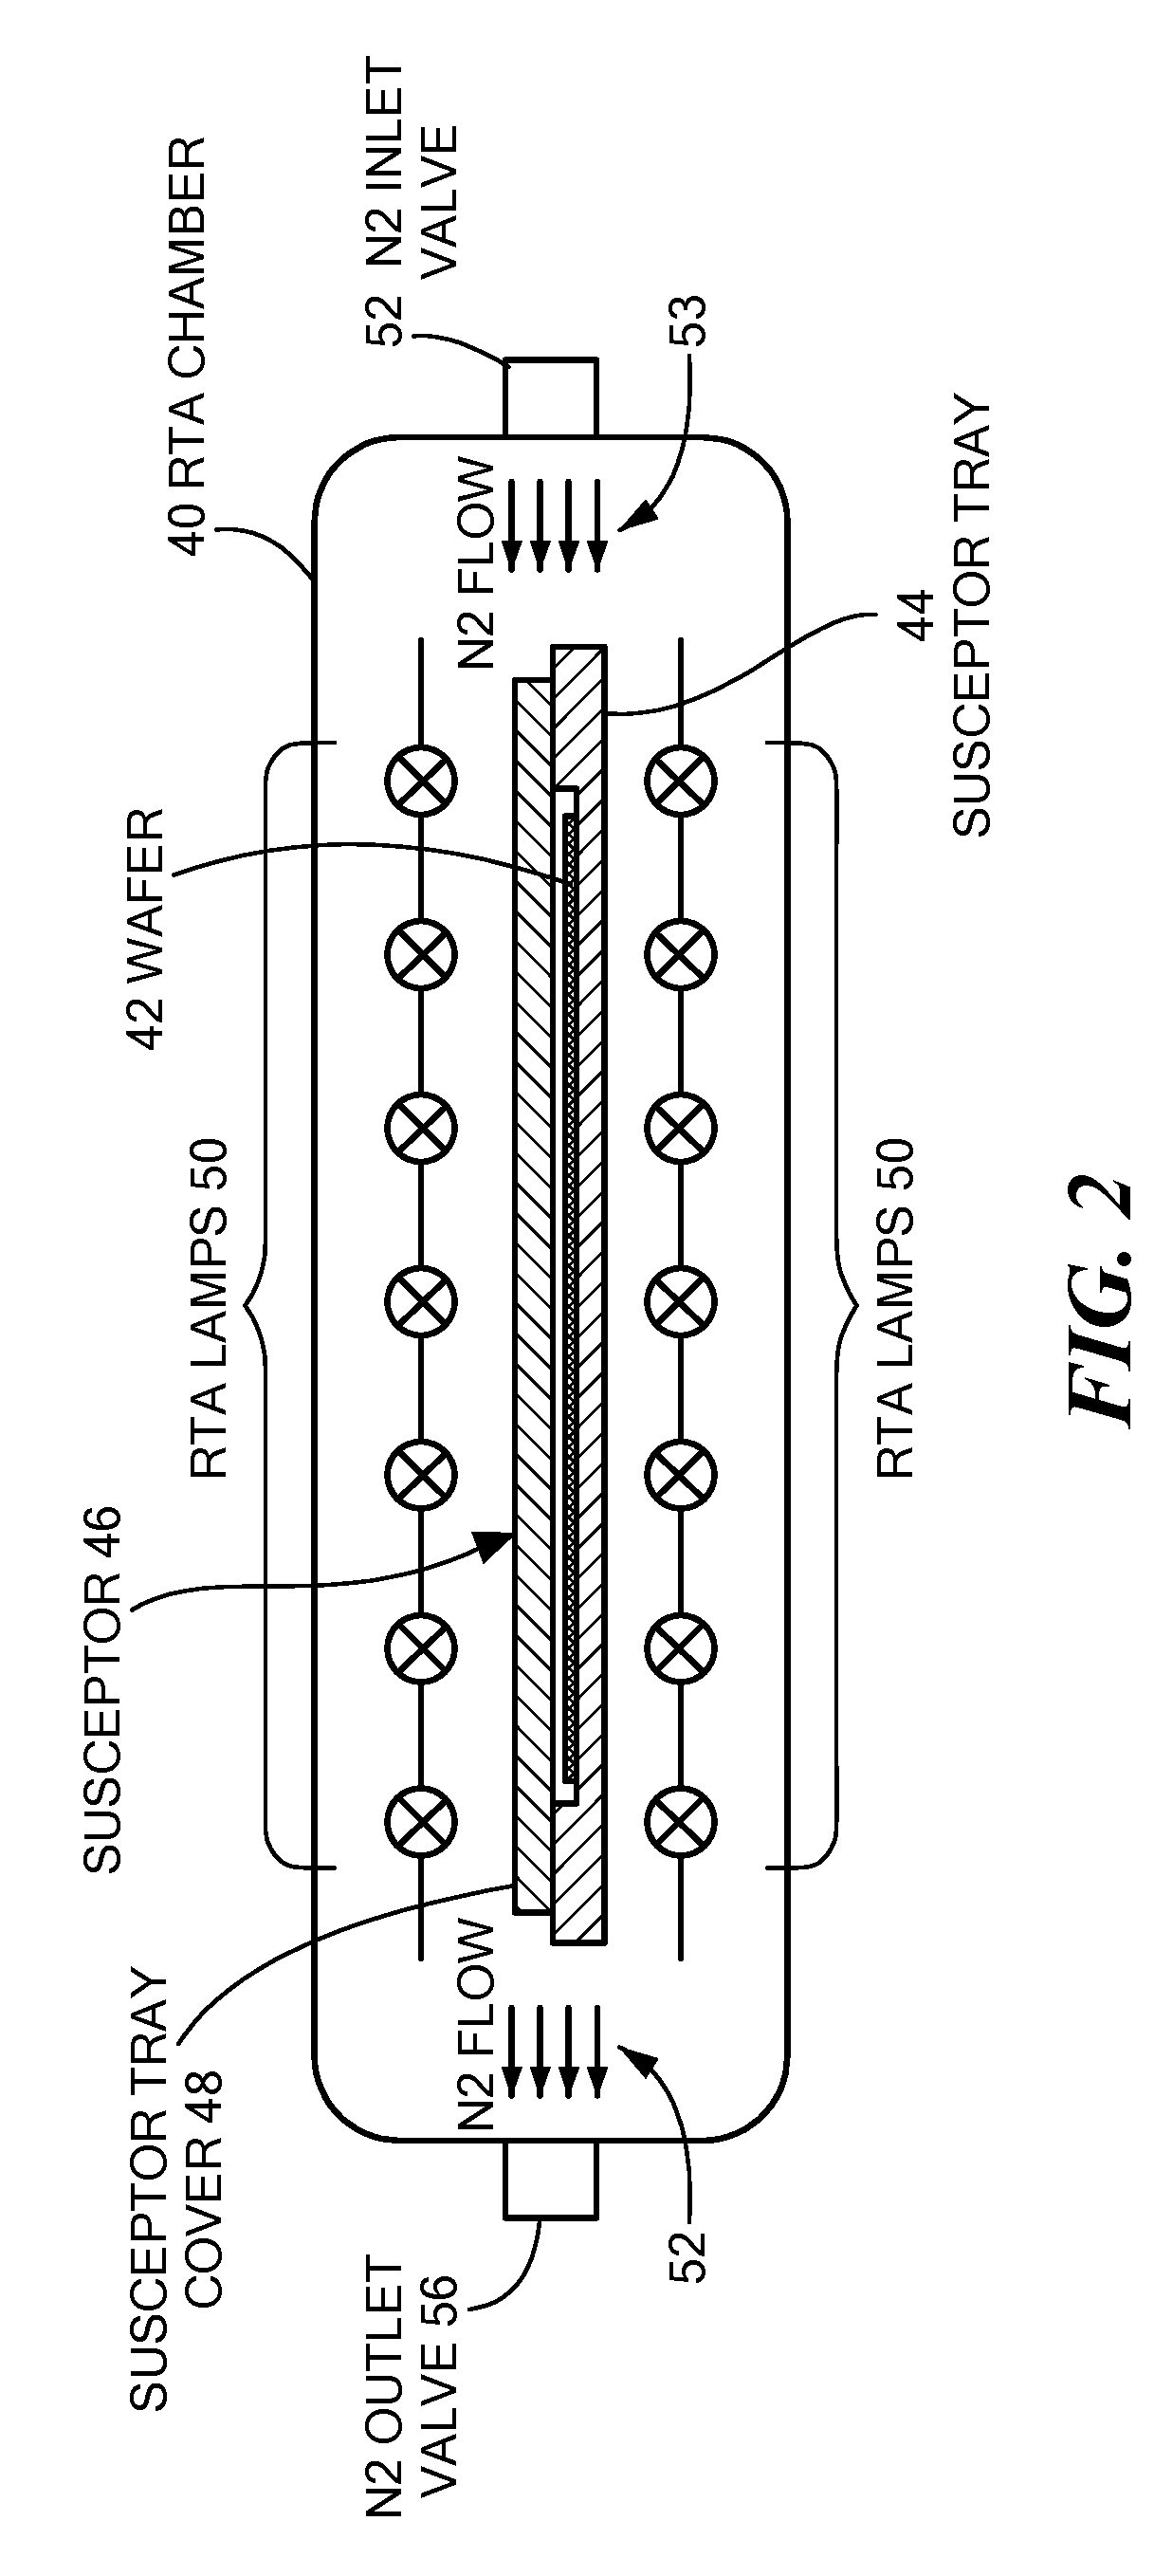 Monolithic microwave integrated circuit (MMIC) and method for forming such mmic having rapid thermal annealing compensation elements